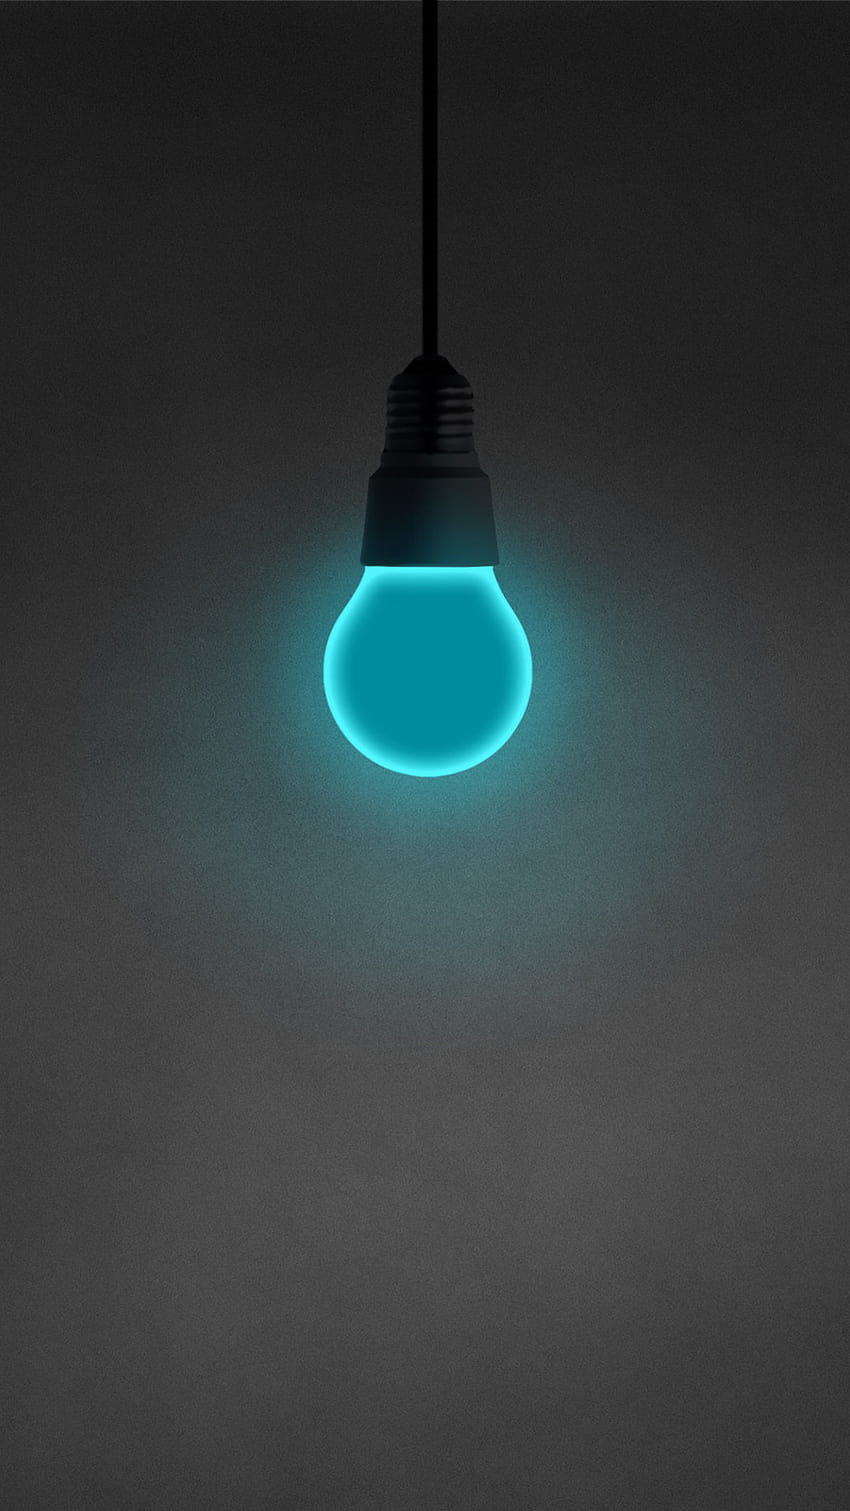 Black LED bulb, minimalism, dark, simple, cyan, illuminated, electricity • For You For & Mobile, light lamp mobile HD phone wallpaper